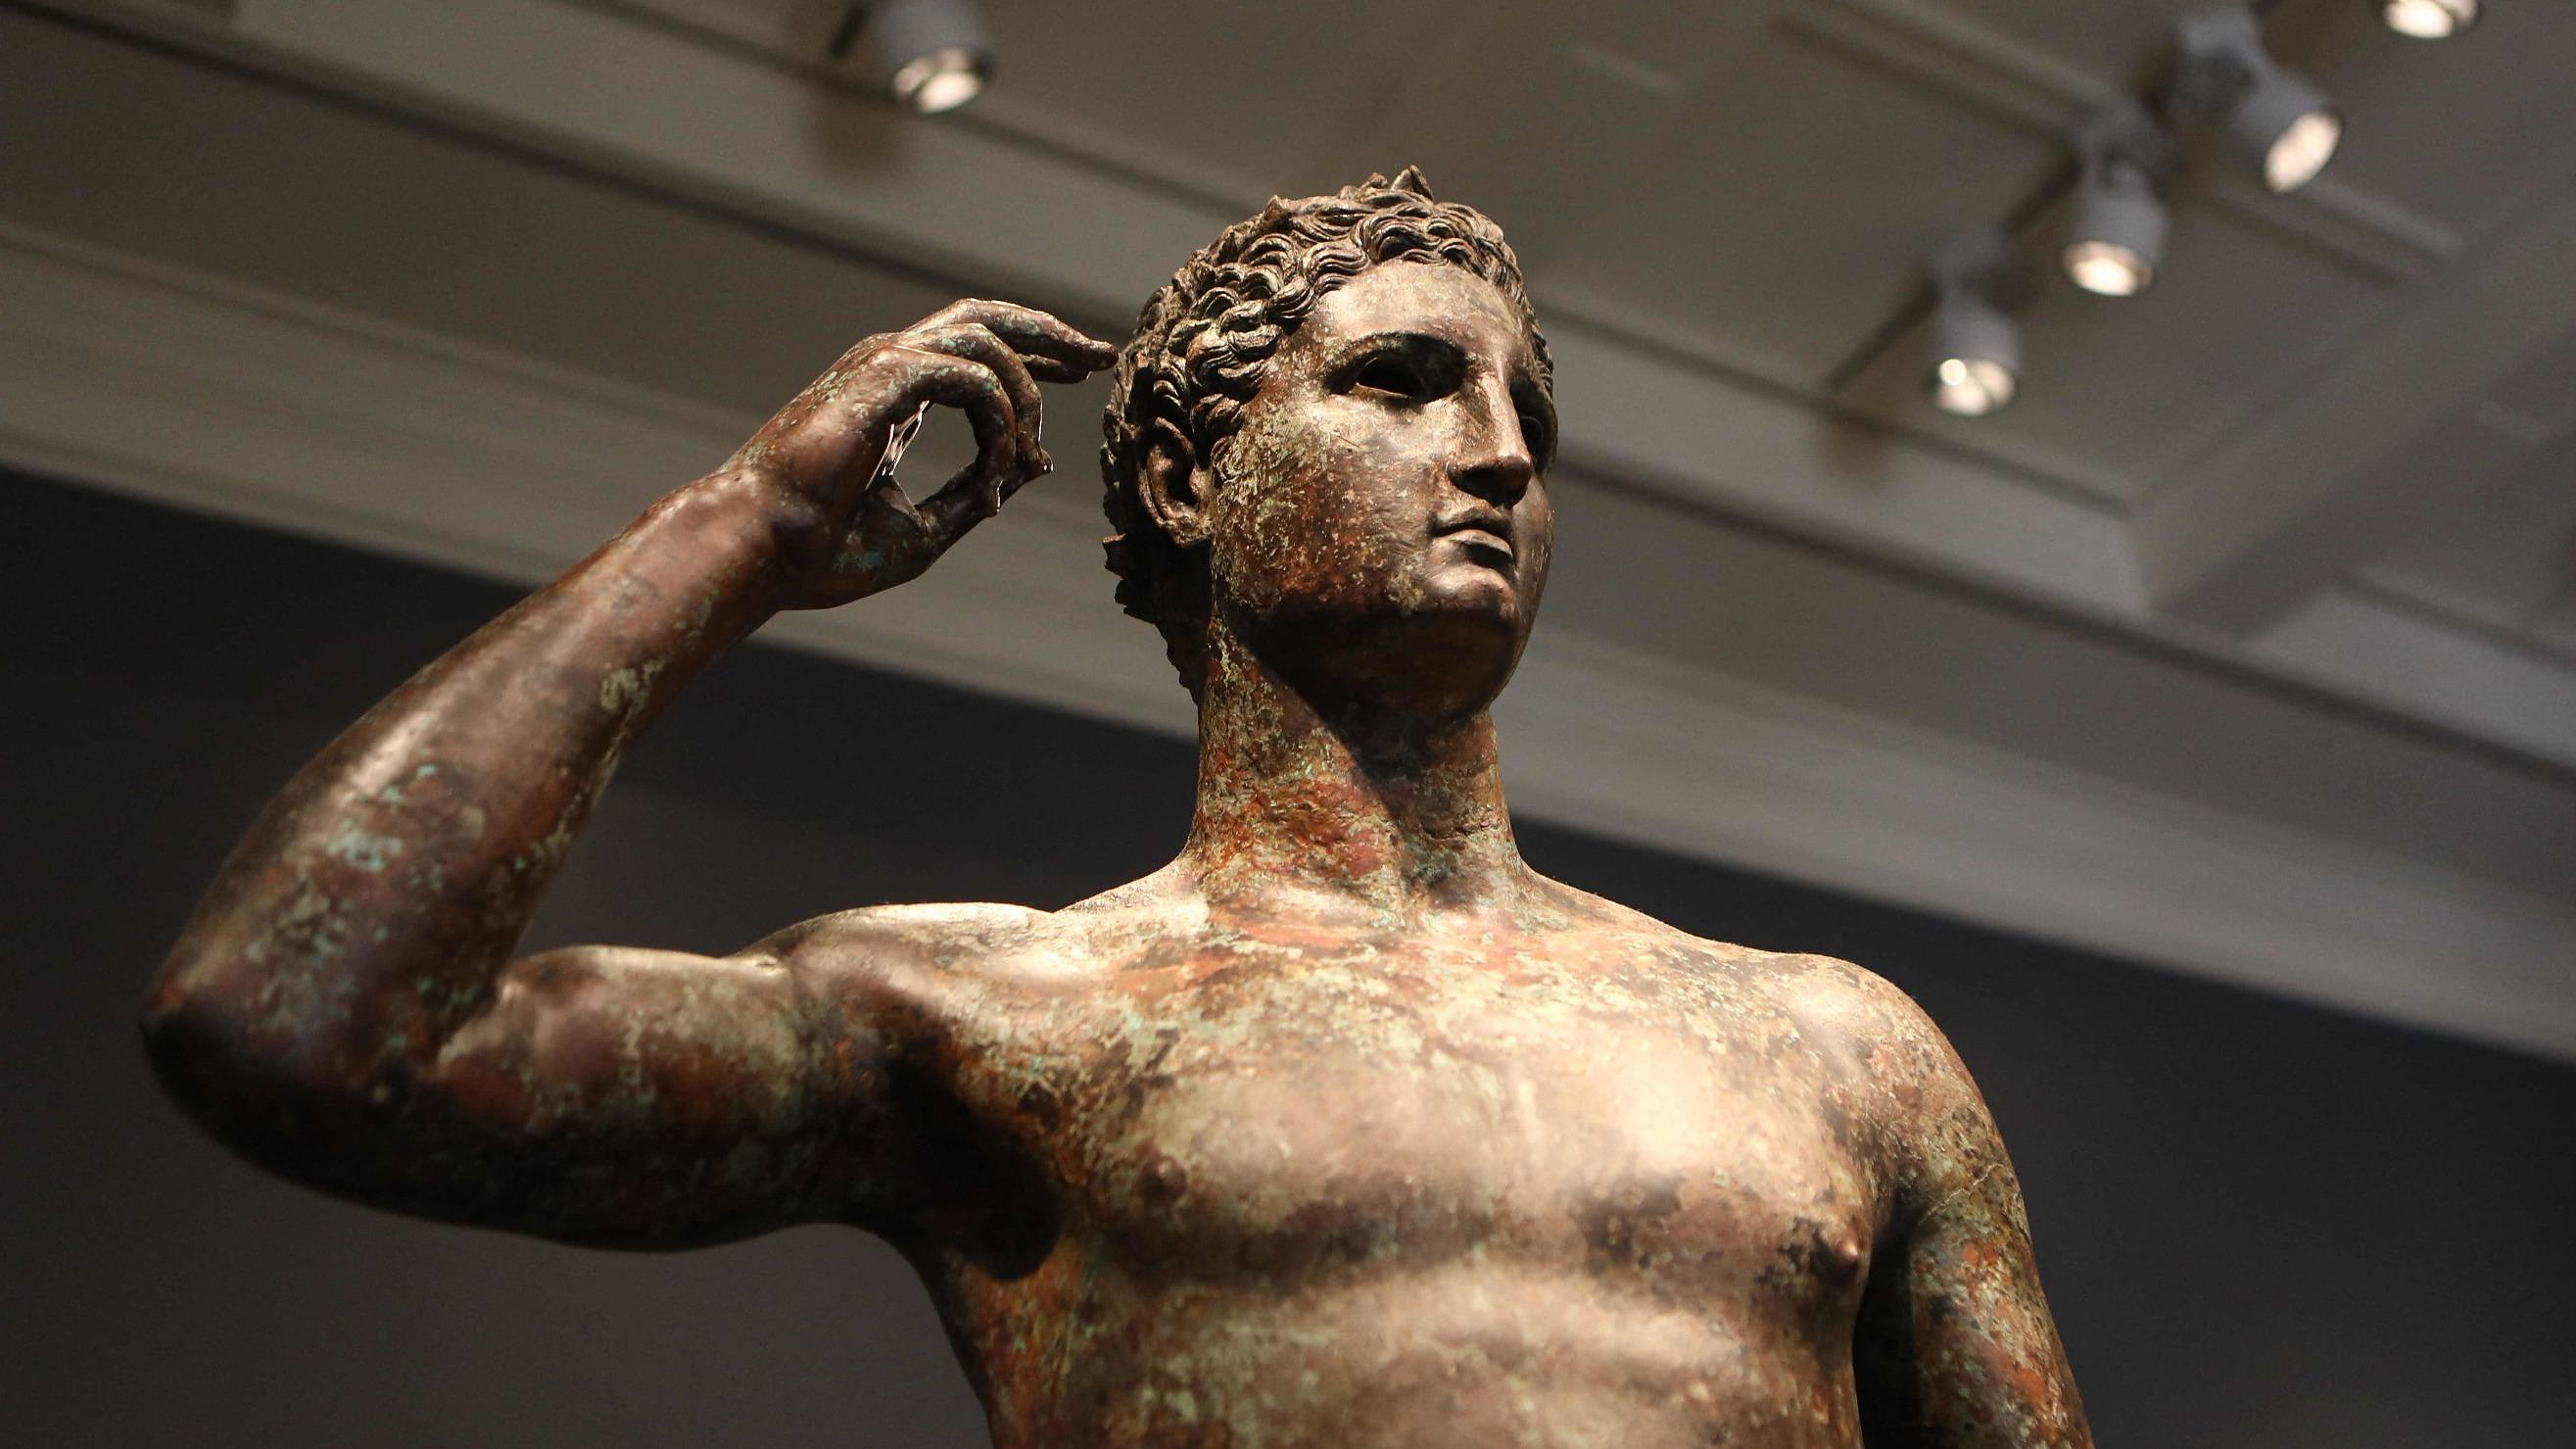 Italy wins a decisive round against an American museum for the restitution of an ancient bronze